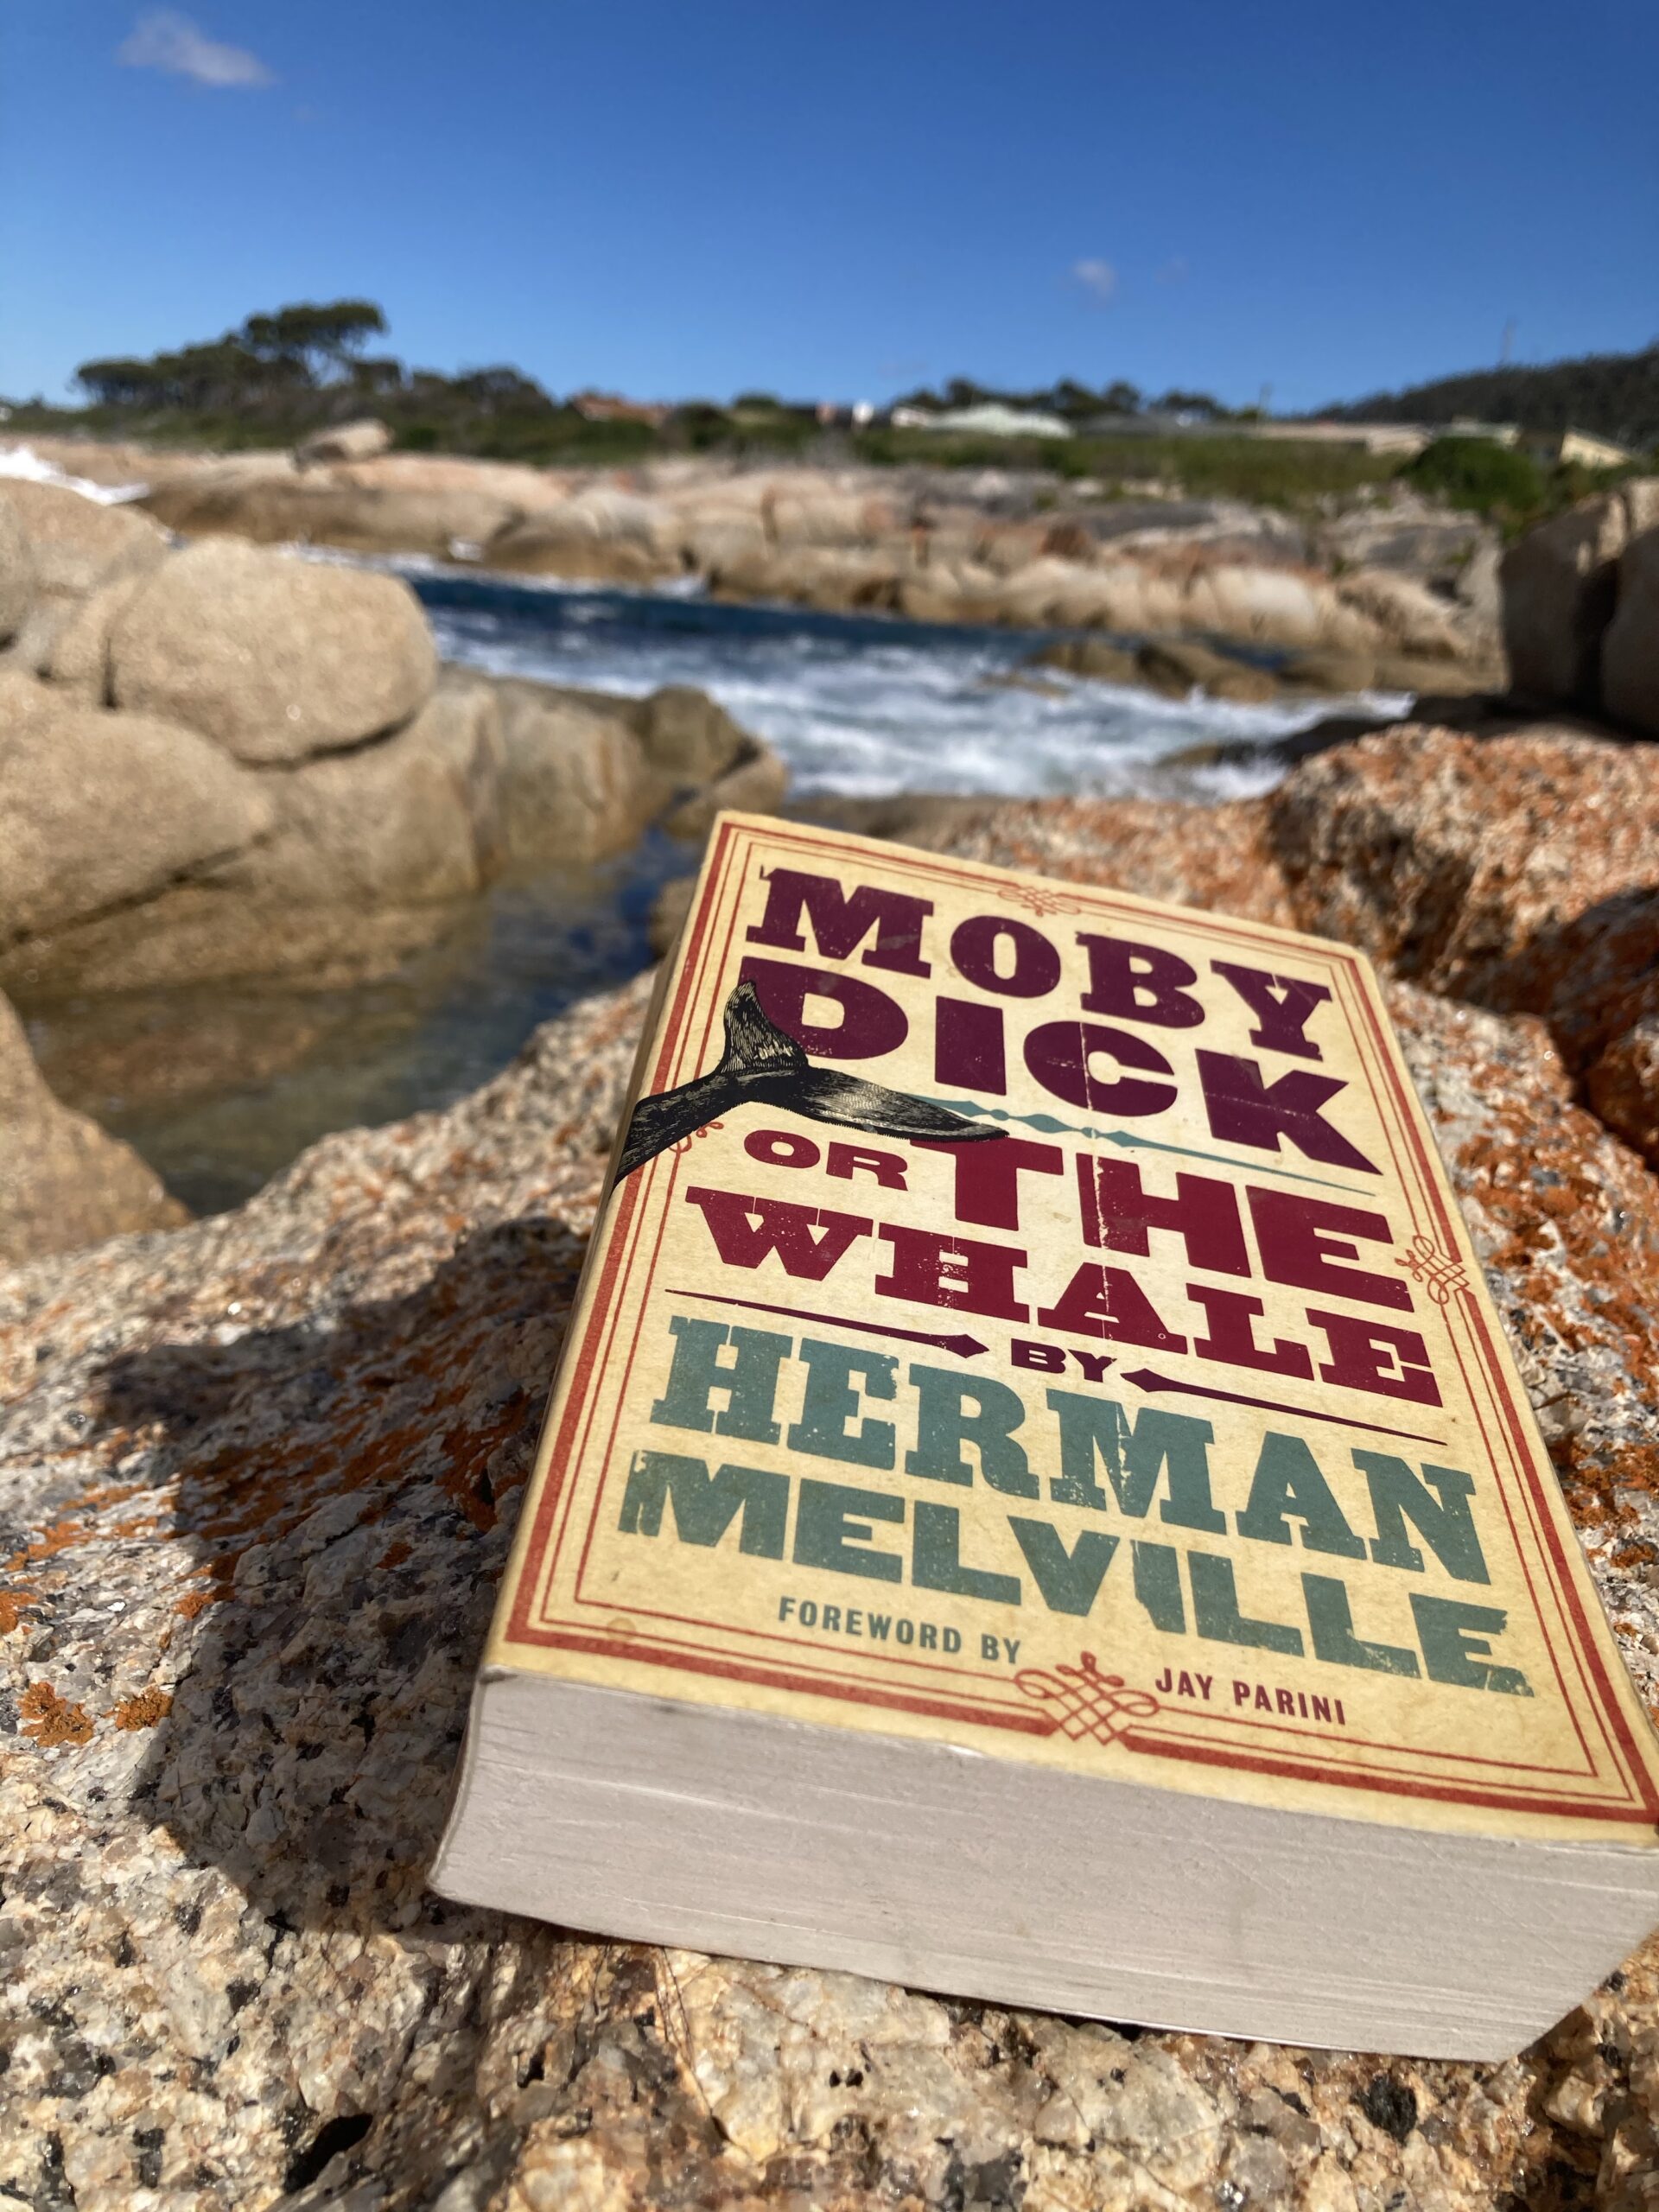 moby dick recensione libro melville